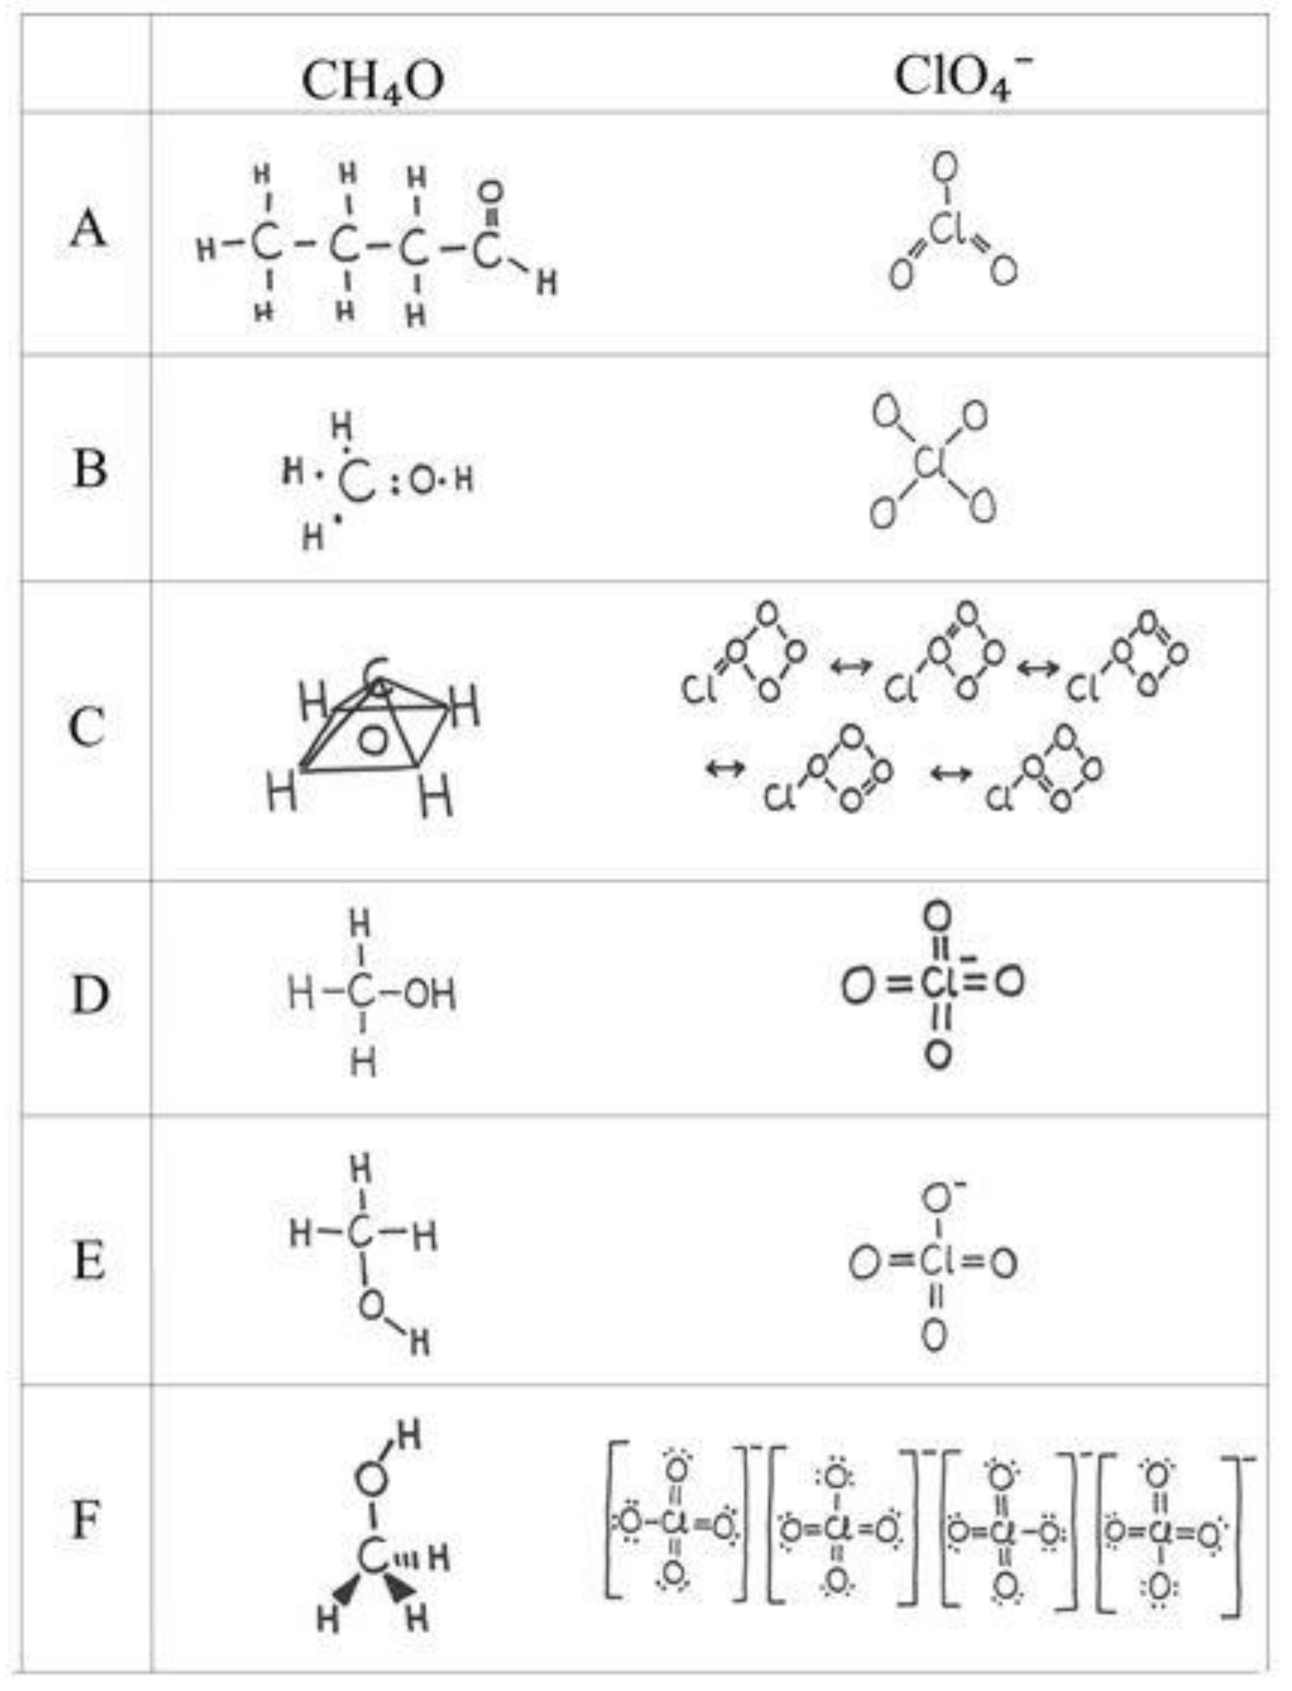 How to Draw Lewis Structures for Simple Organic Compounds